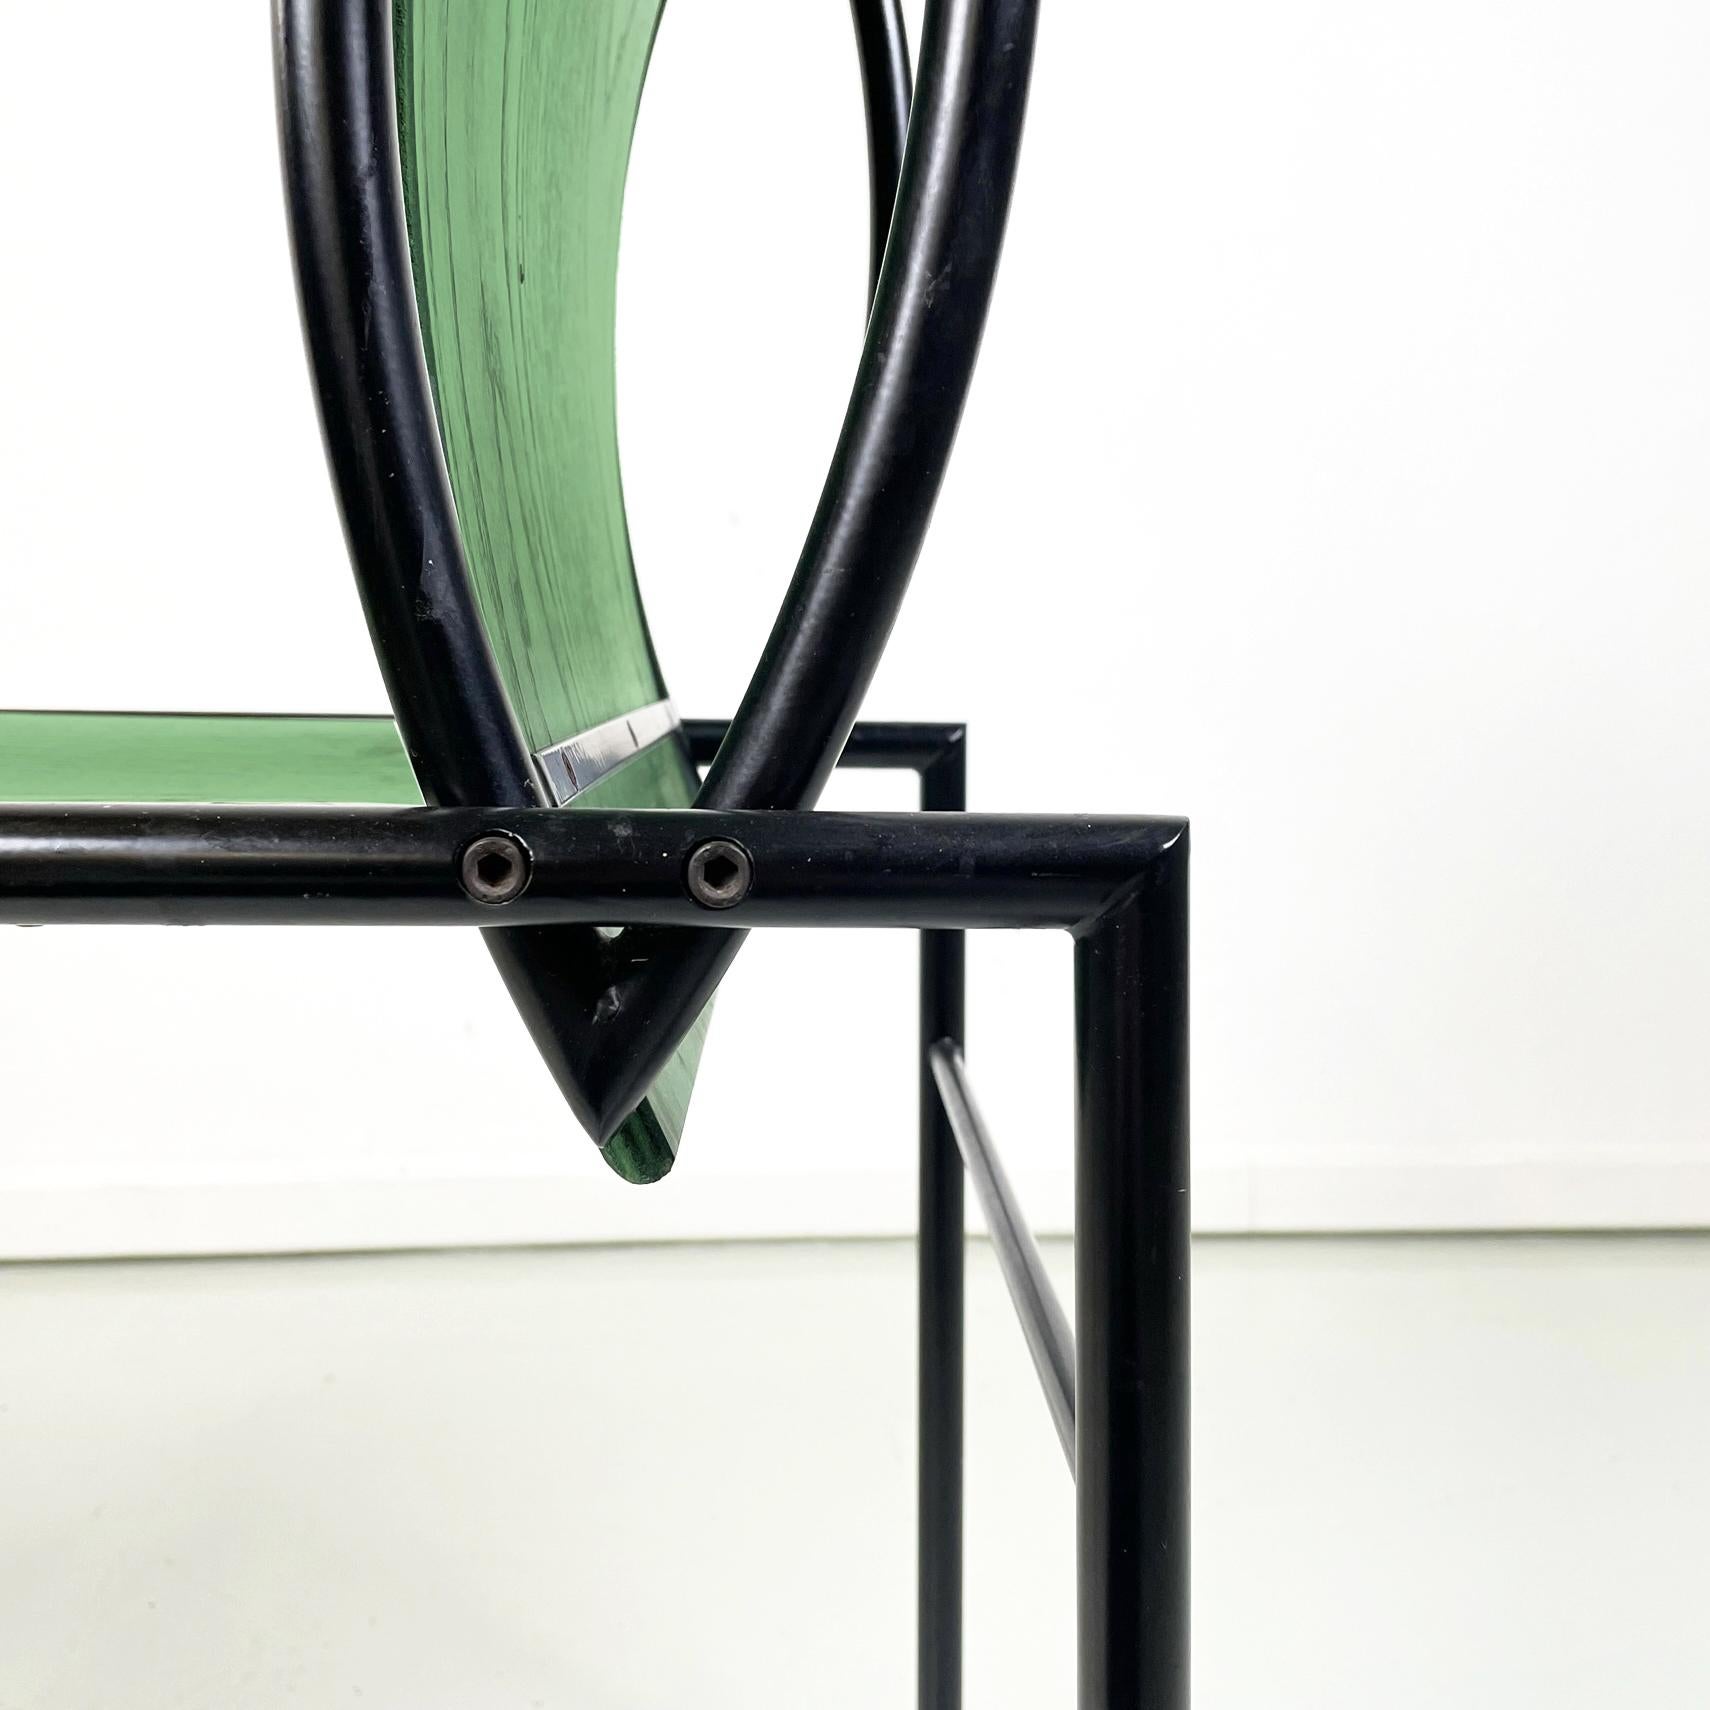 Italian modern Green wood black metal chair Kim by De Lucchi for Memphis, 1980s For Sale 7